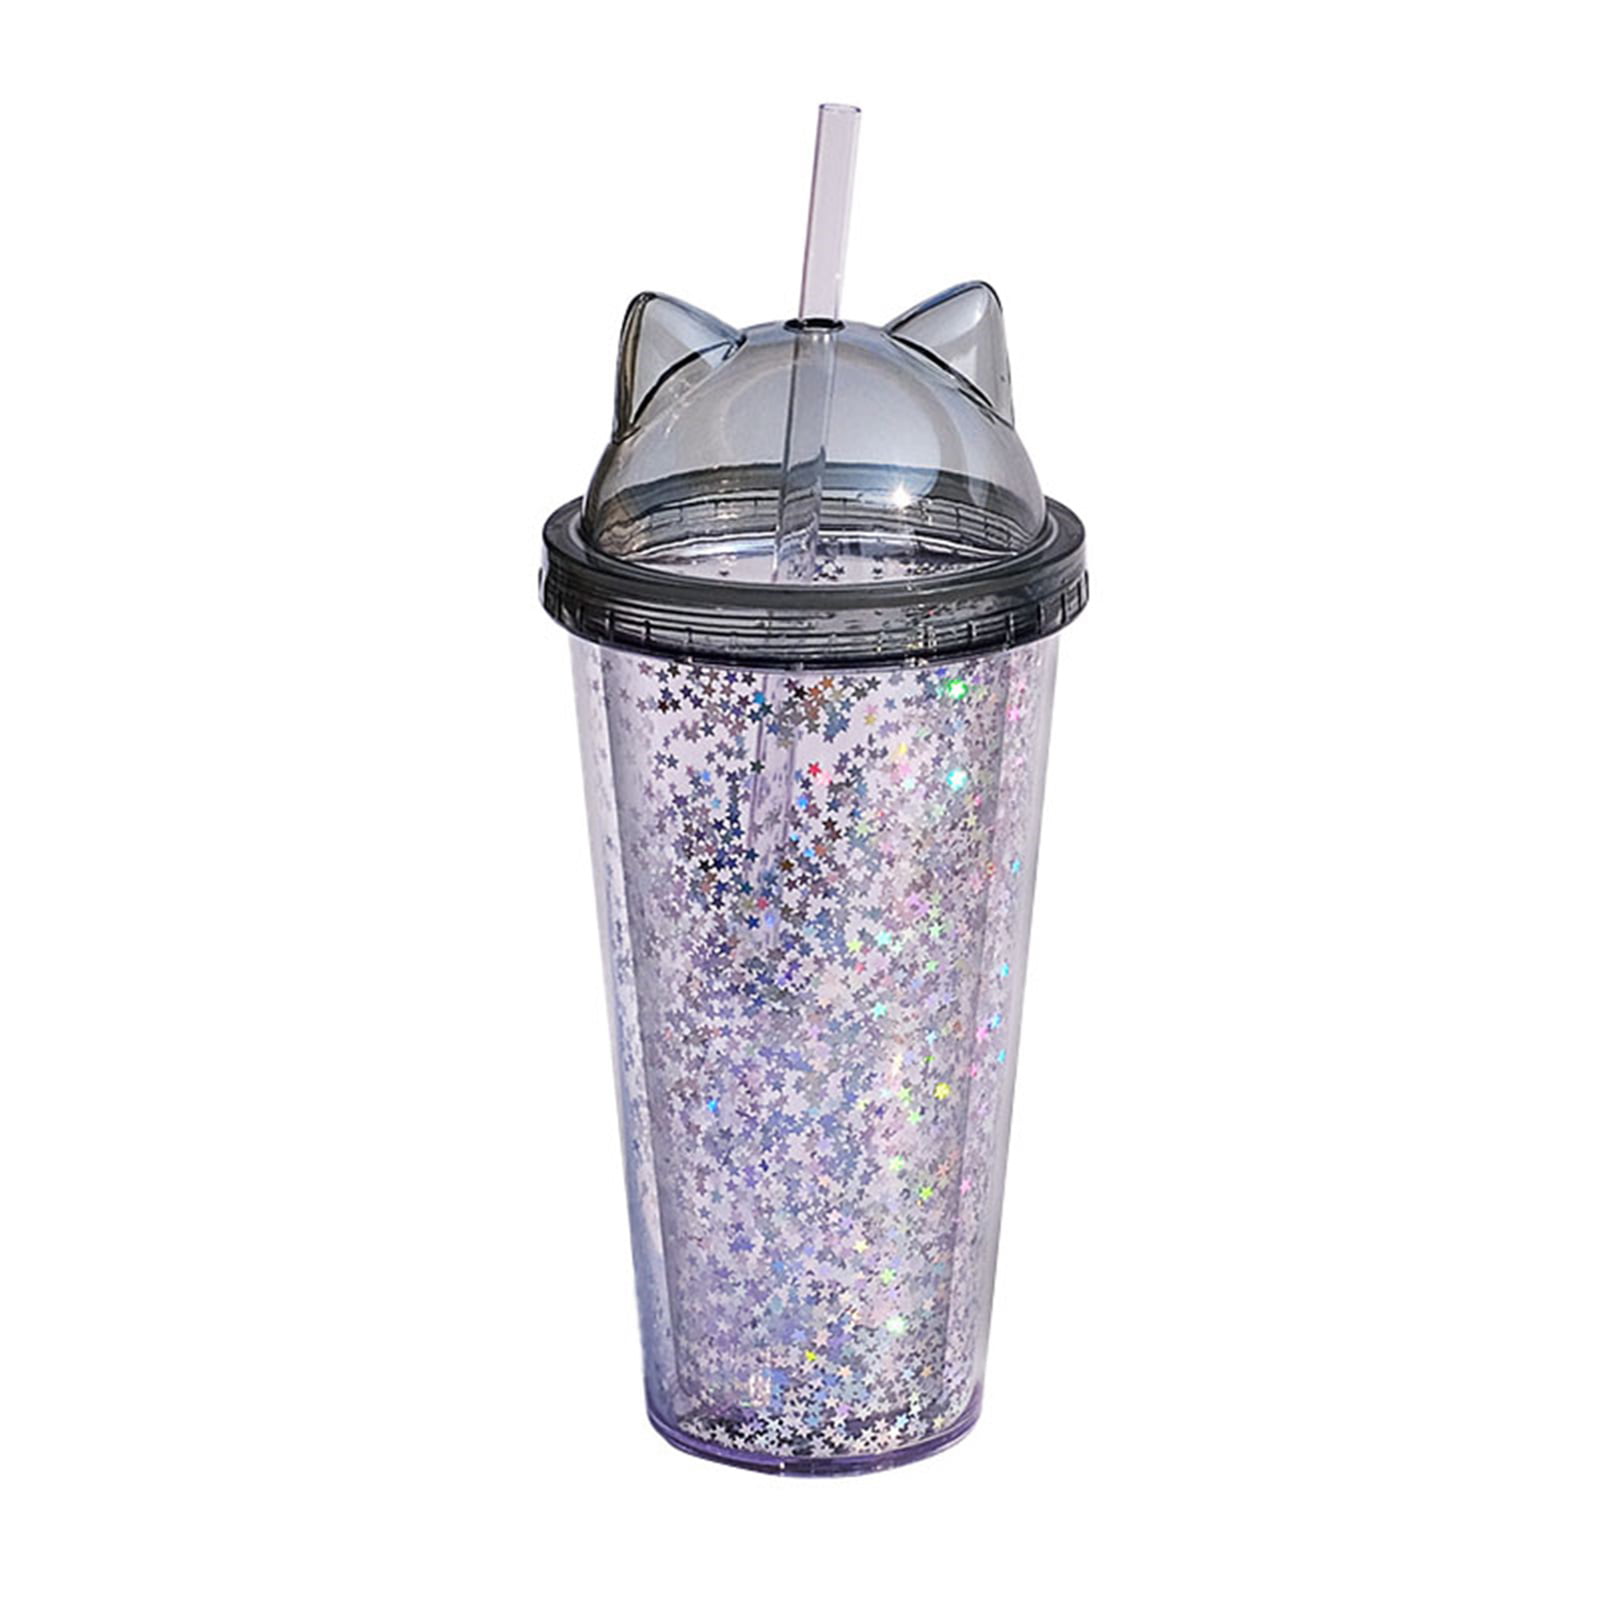 Visland Drinking Cup, Cool Astronaut Design Glitter Double Walled Cup with Lid and Straw - Reusable BPA Free Drinking Tumbler Cup for Summer Party and